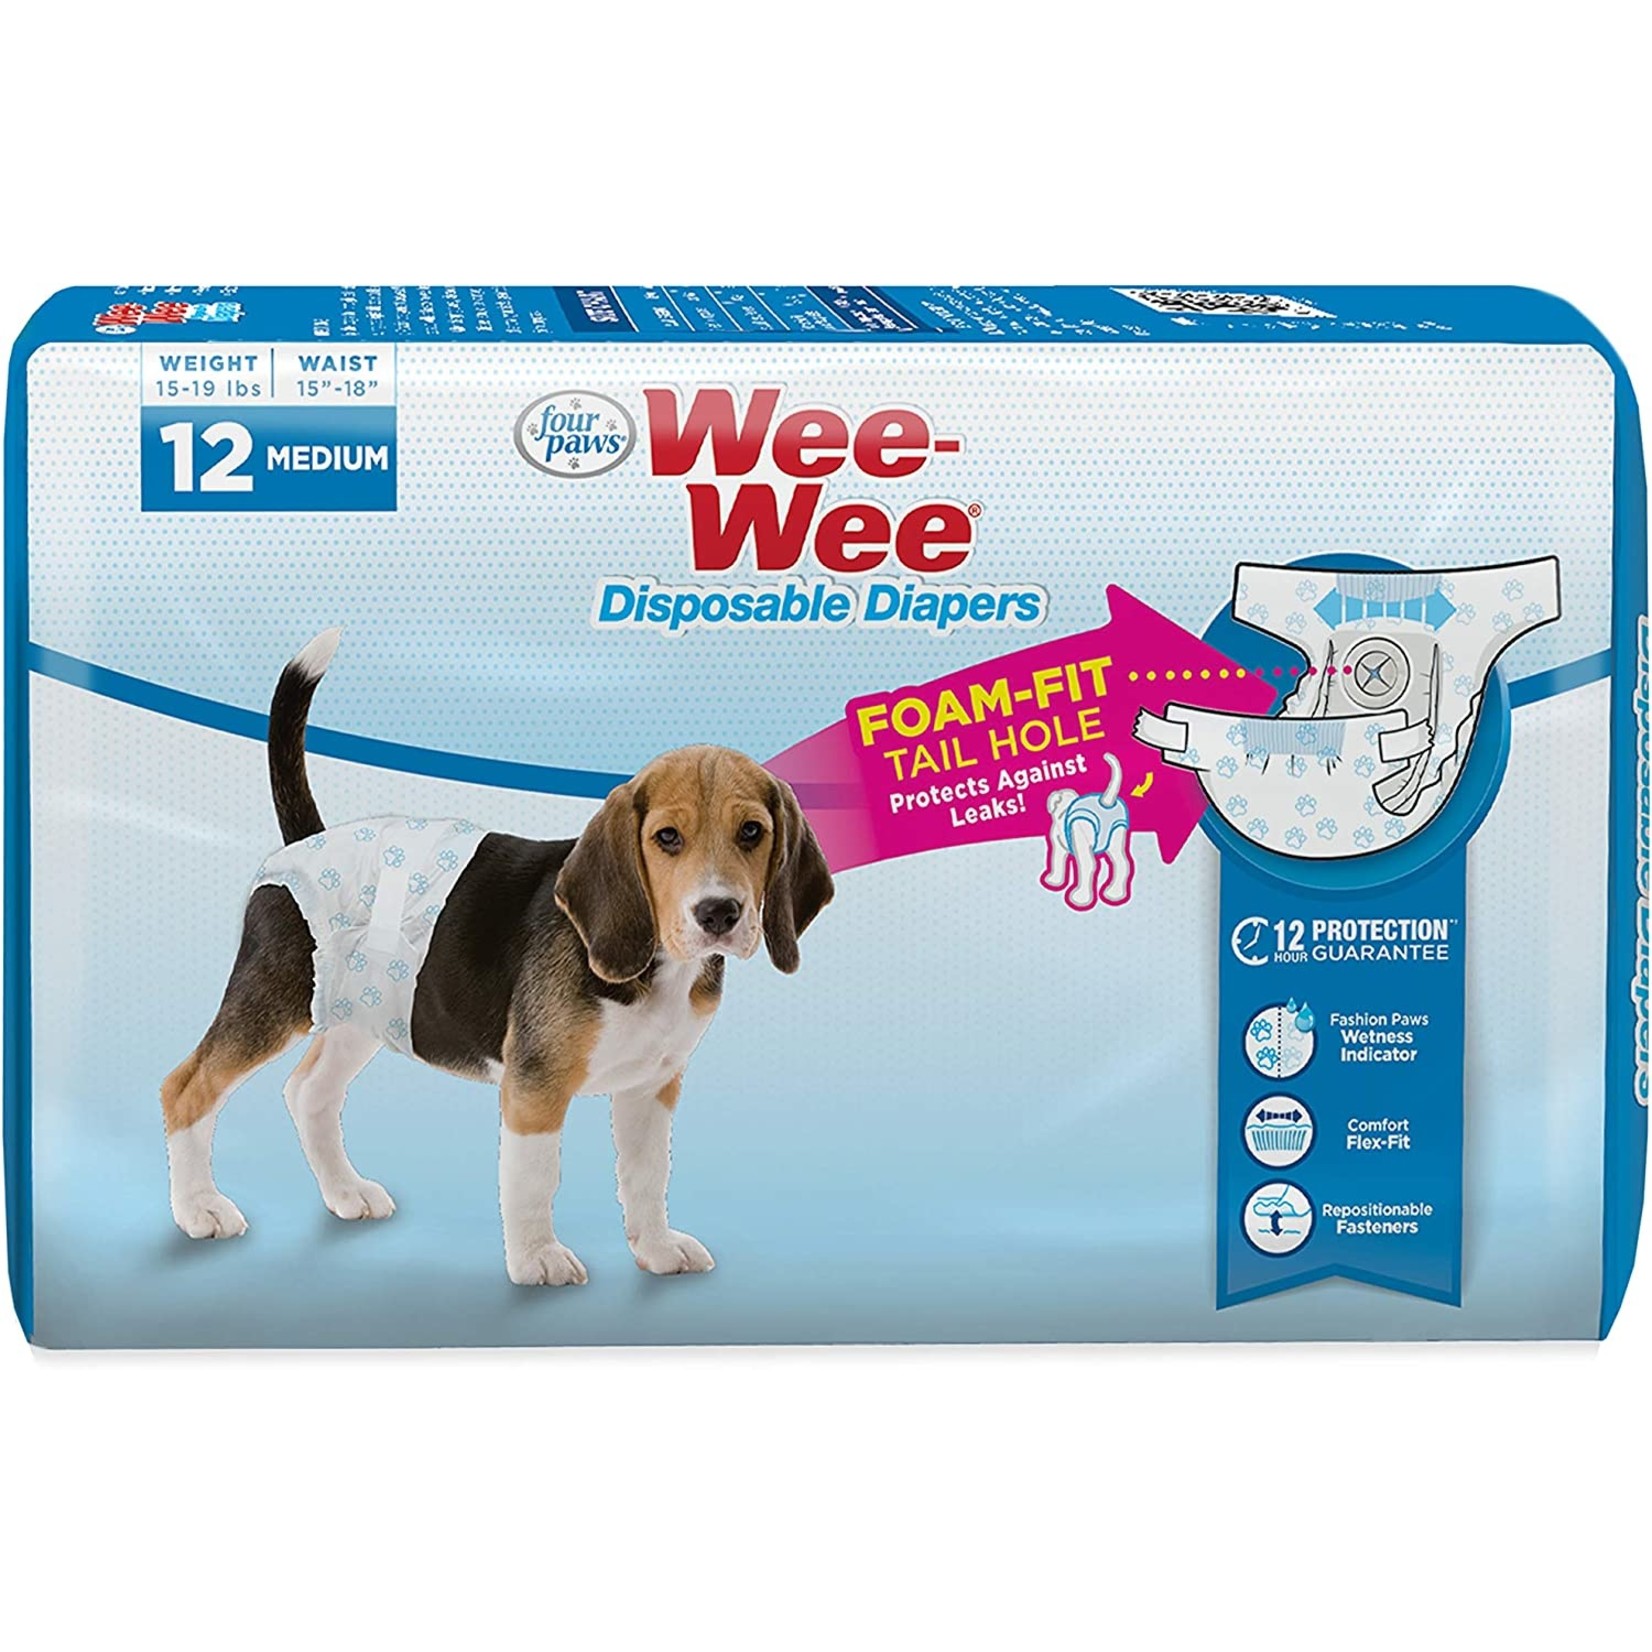 Four Paws Four Paws Wee Wee Diaper 12hr Medium 12 count